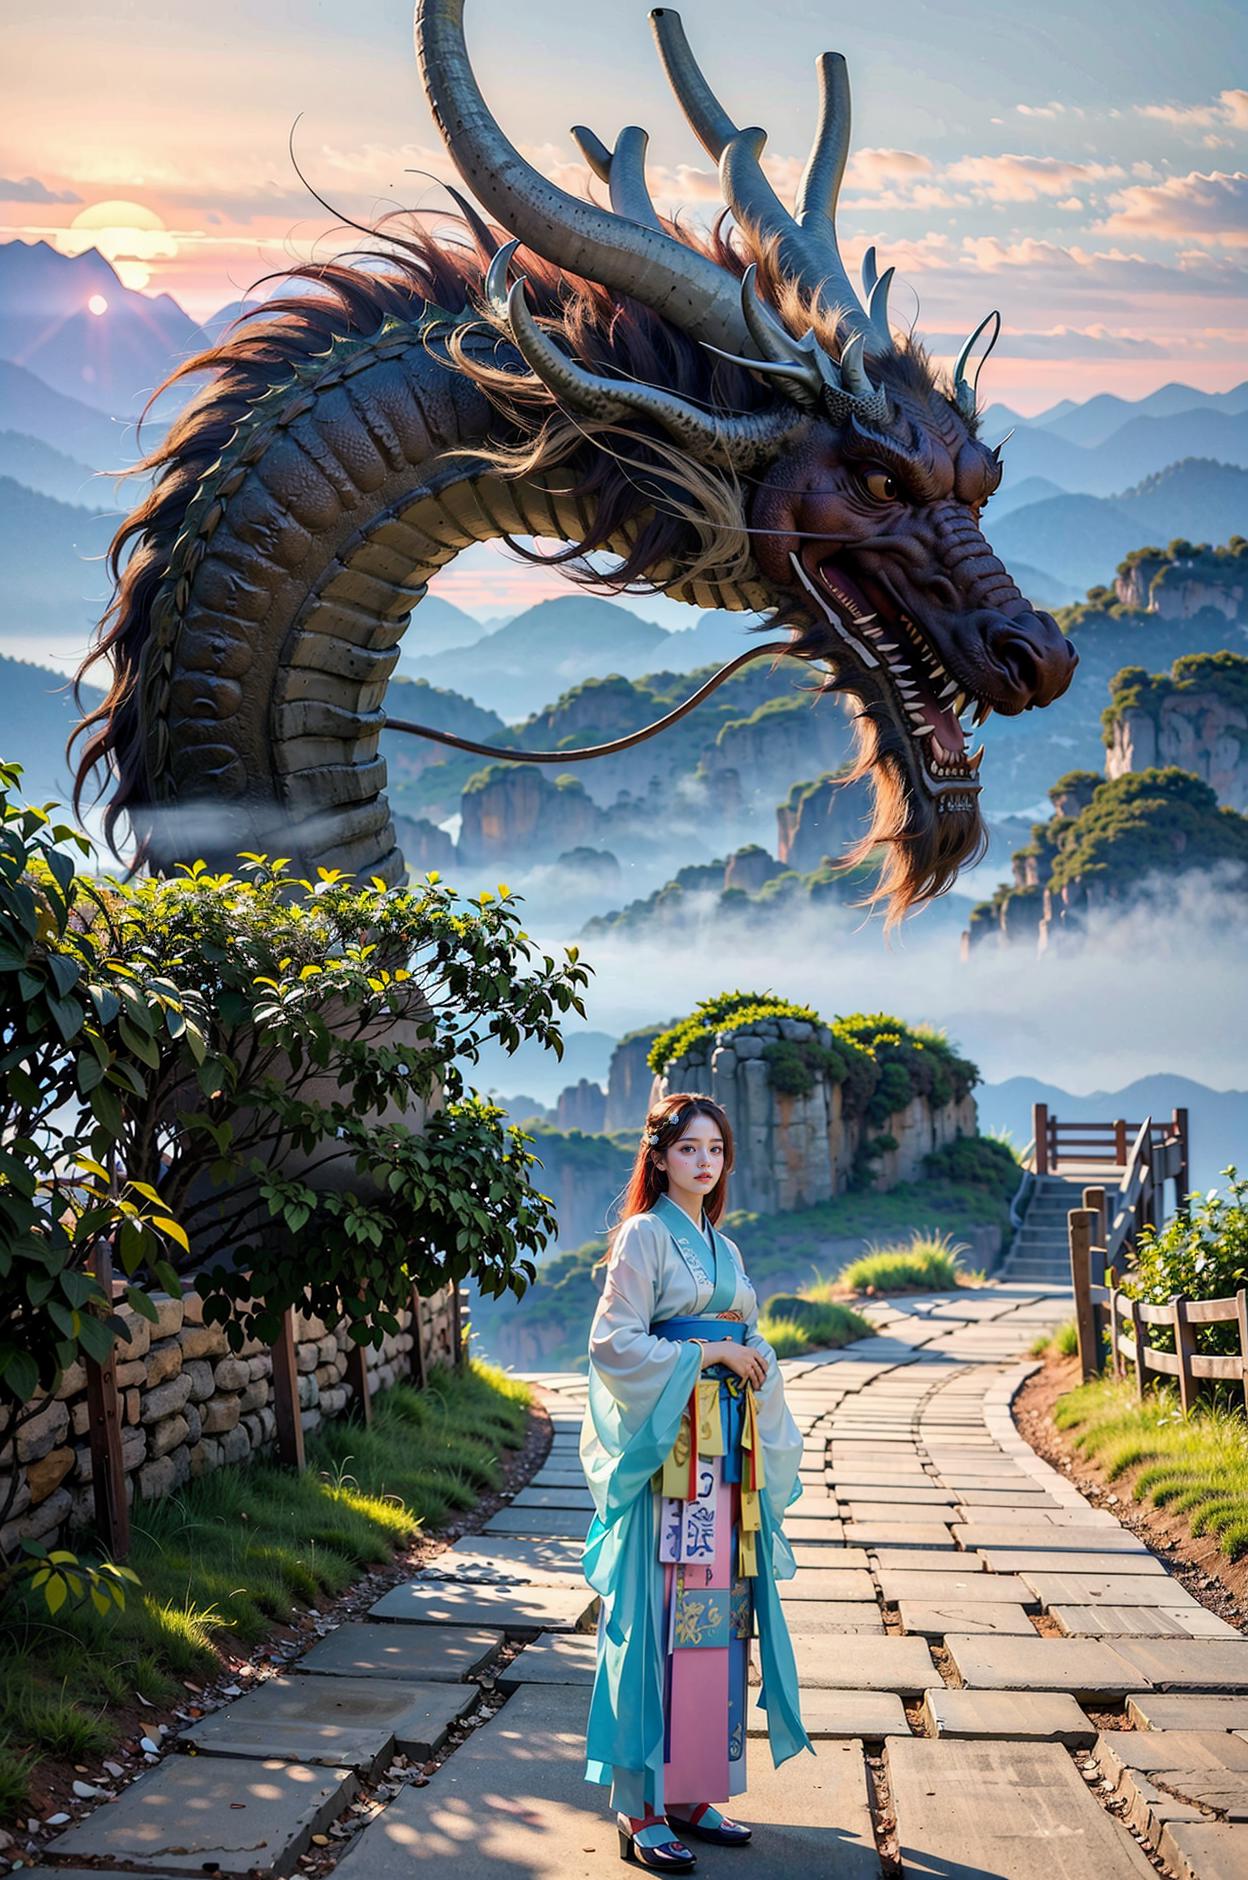 A woman standing in front of a dragon statue overlooking a mountain.